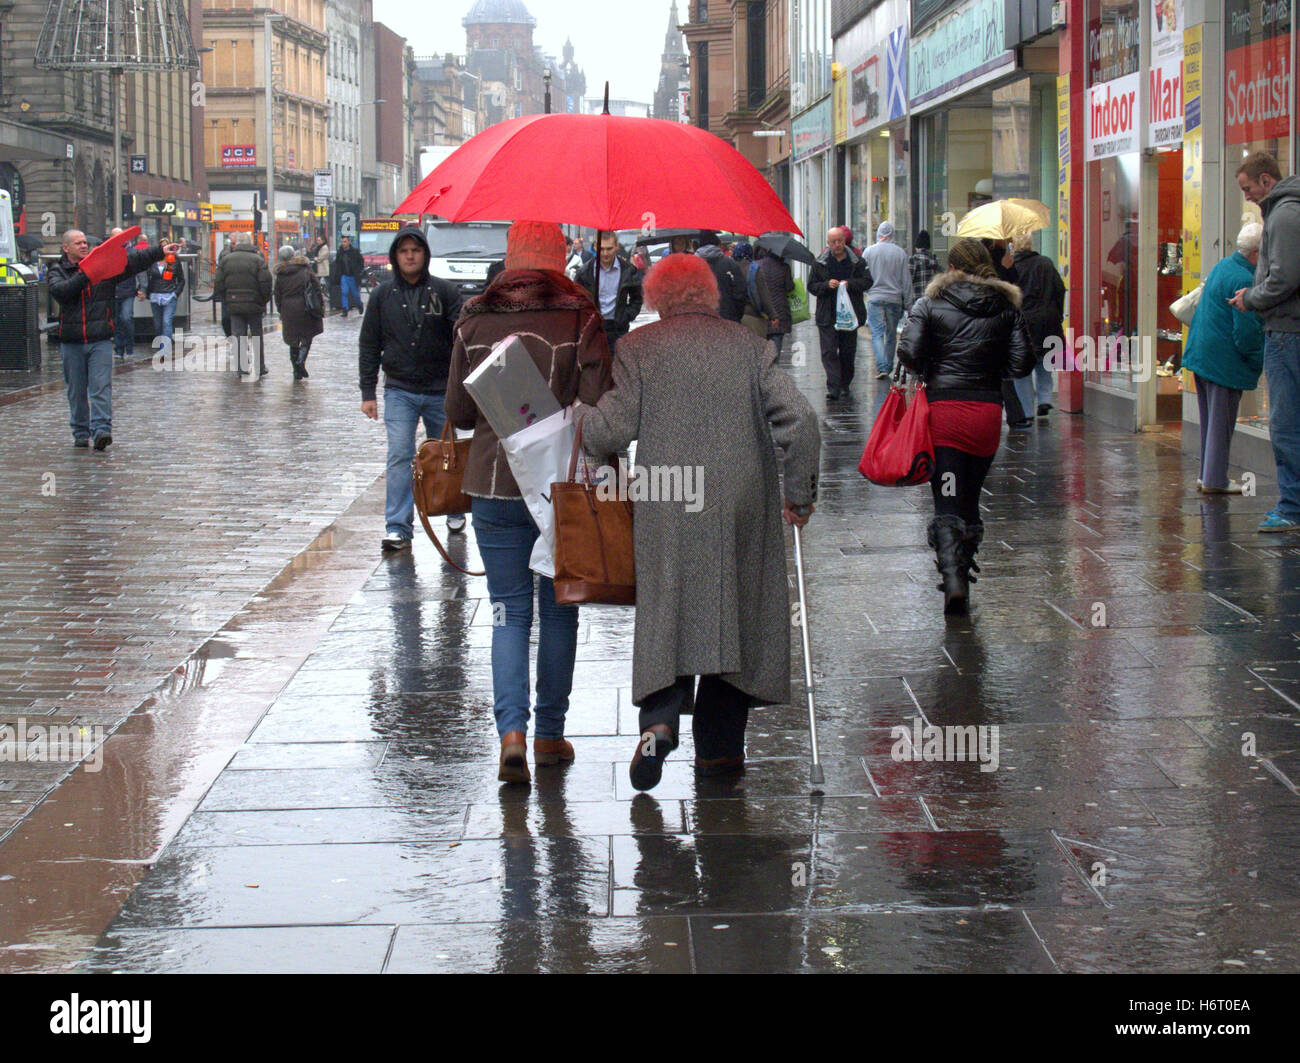 Glasgow in the rain wet streets and red  umbrella umbrellas shopping bags Stock Photo